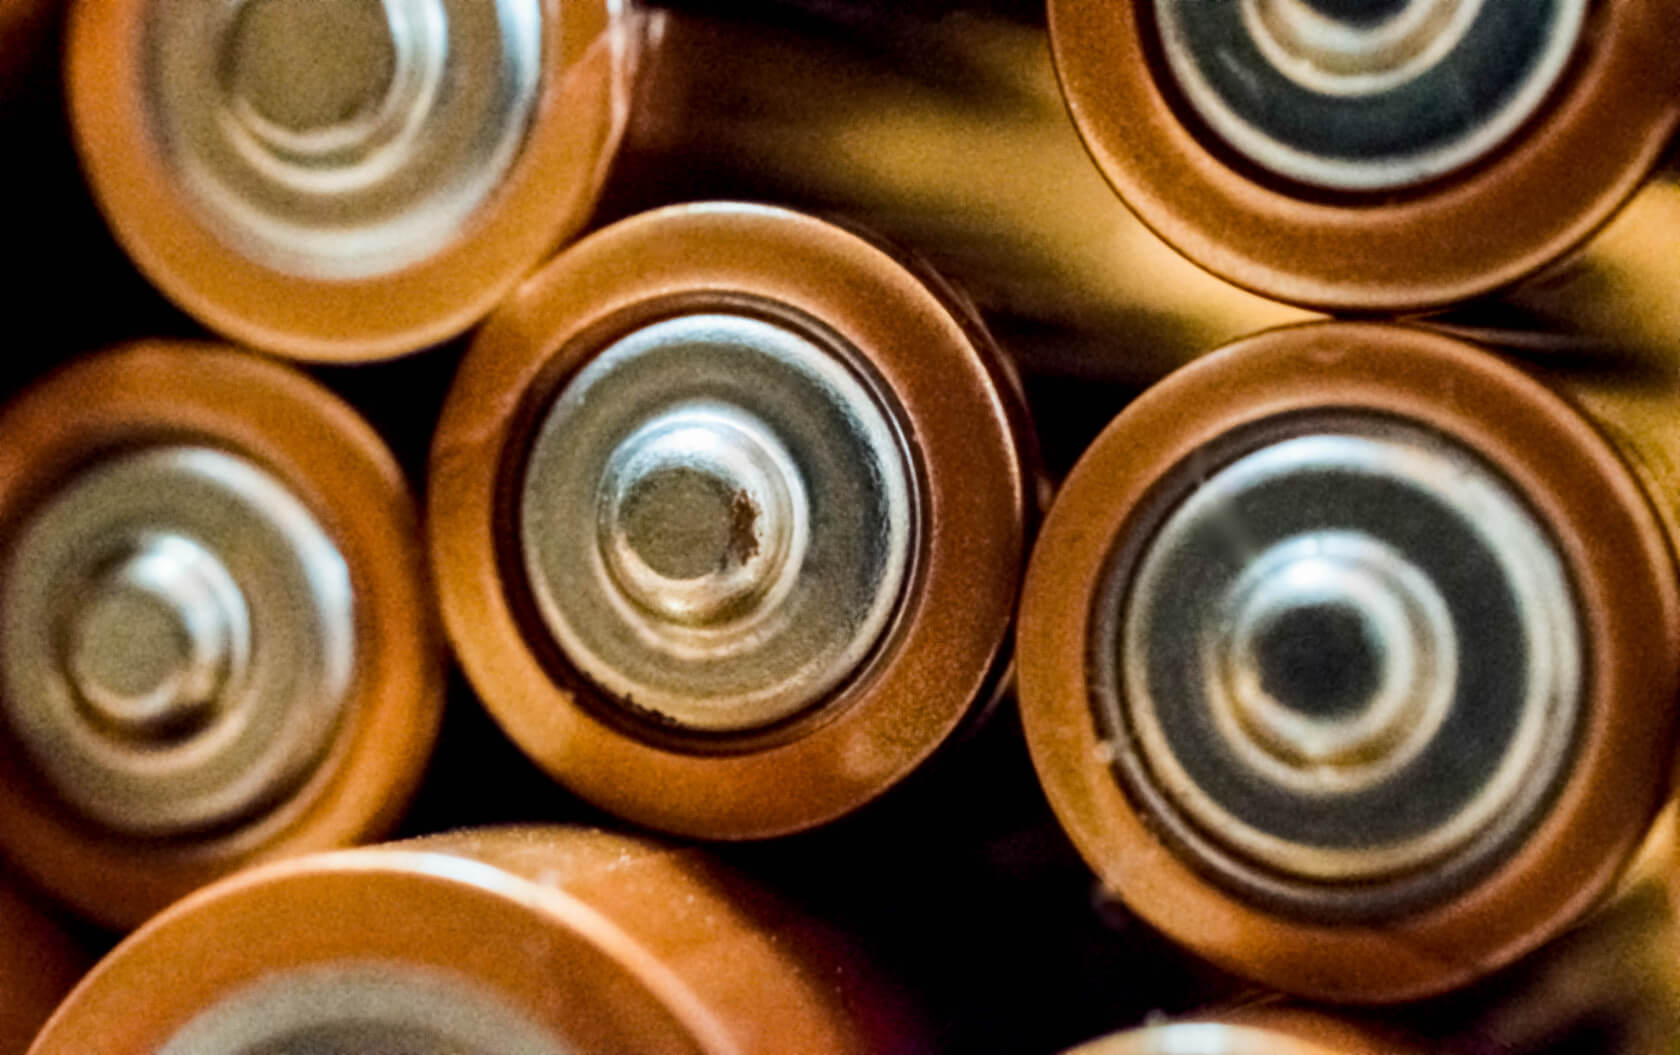 Scientists are developing magnesium batteries, safer and more efficient than traditional Lithium